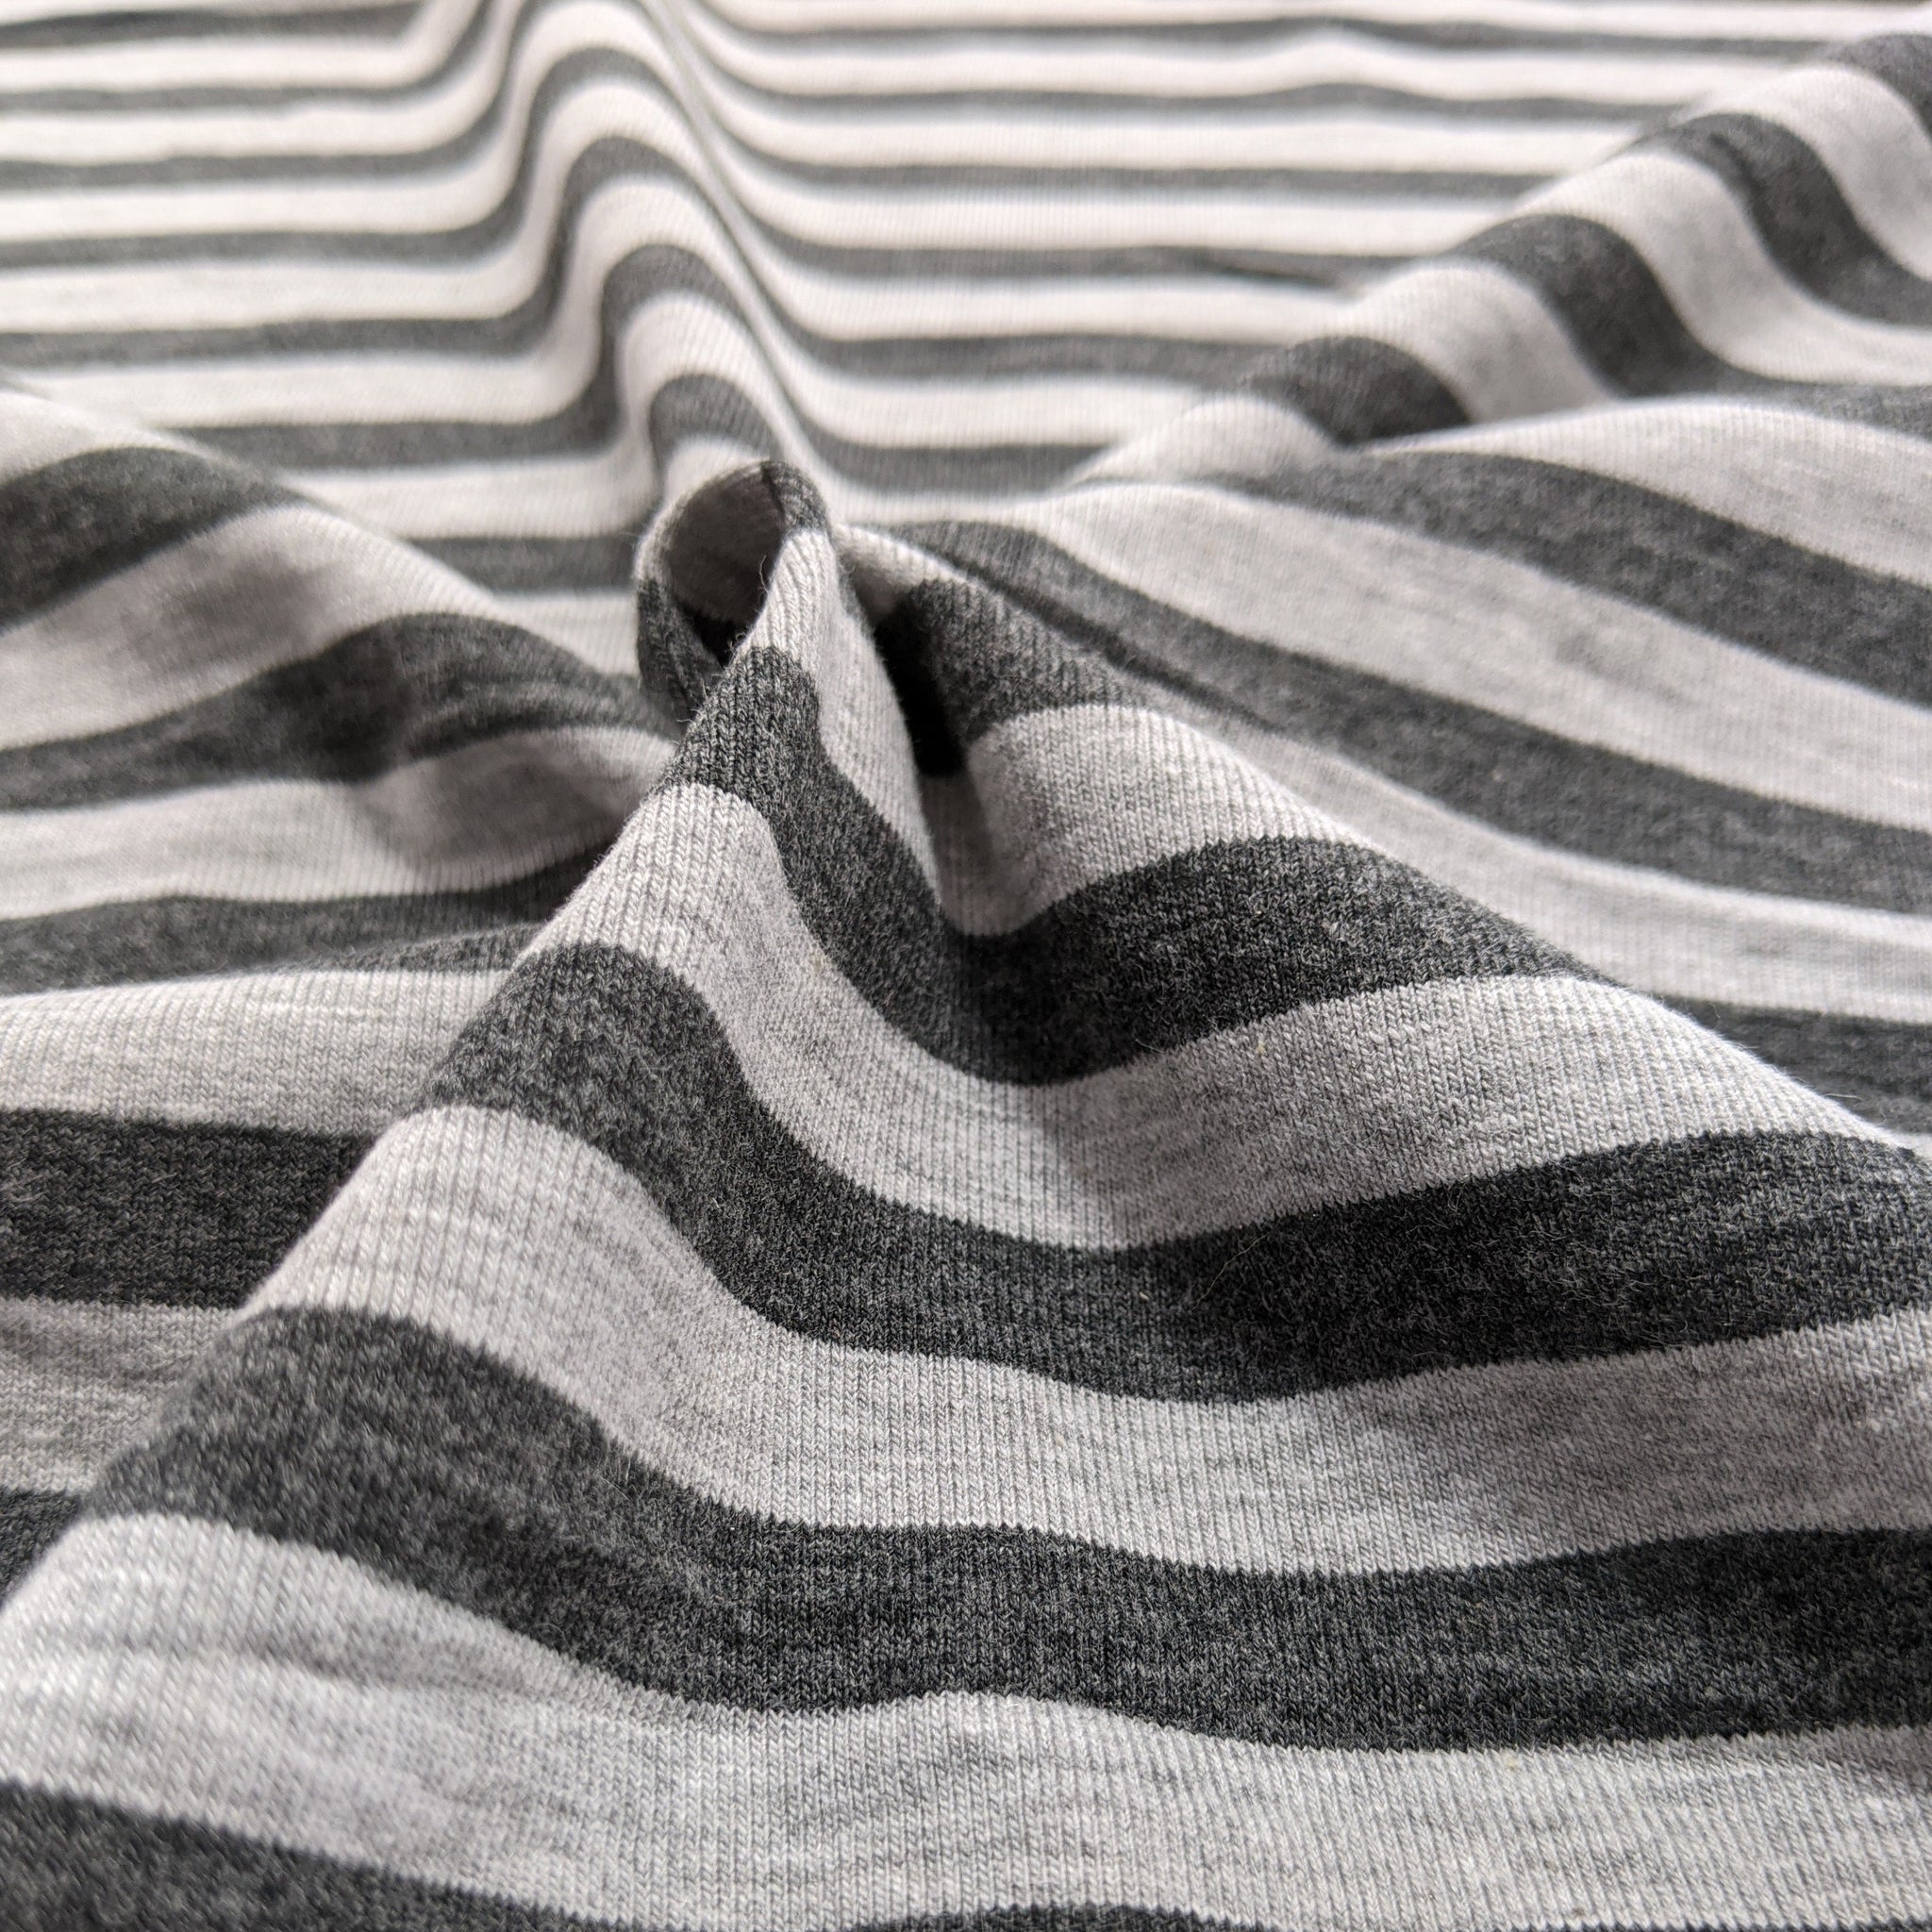 Heather Gray and Charcoal Stripes - Jersey Knit – Angry Ballerina Fabrics